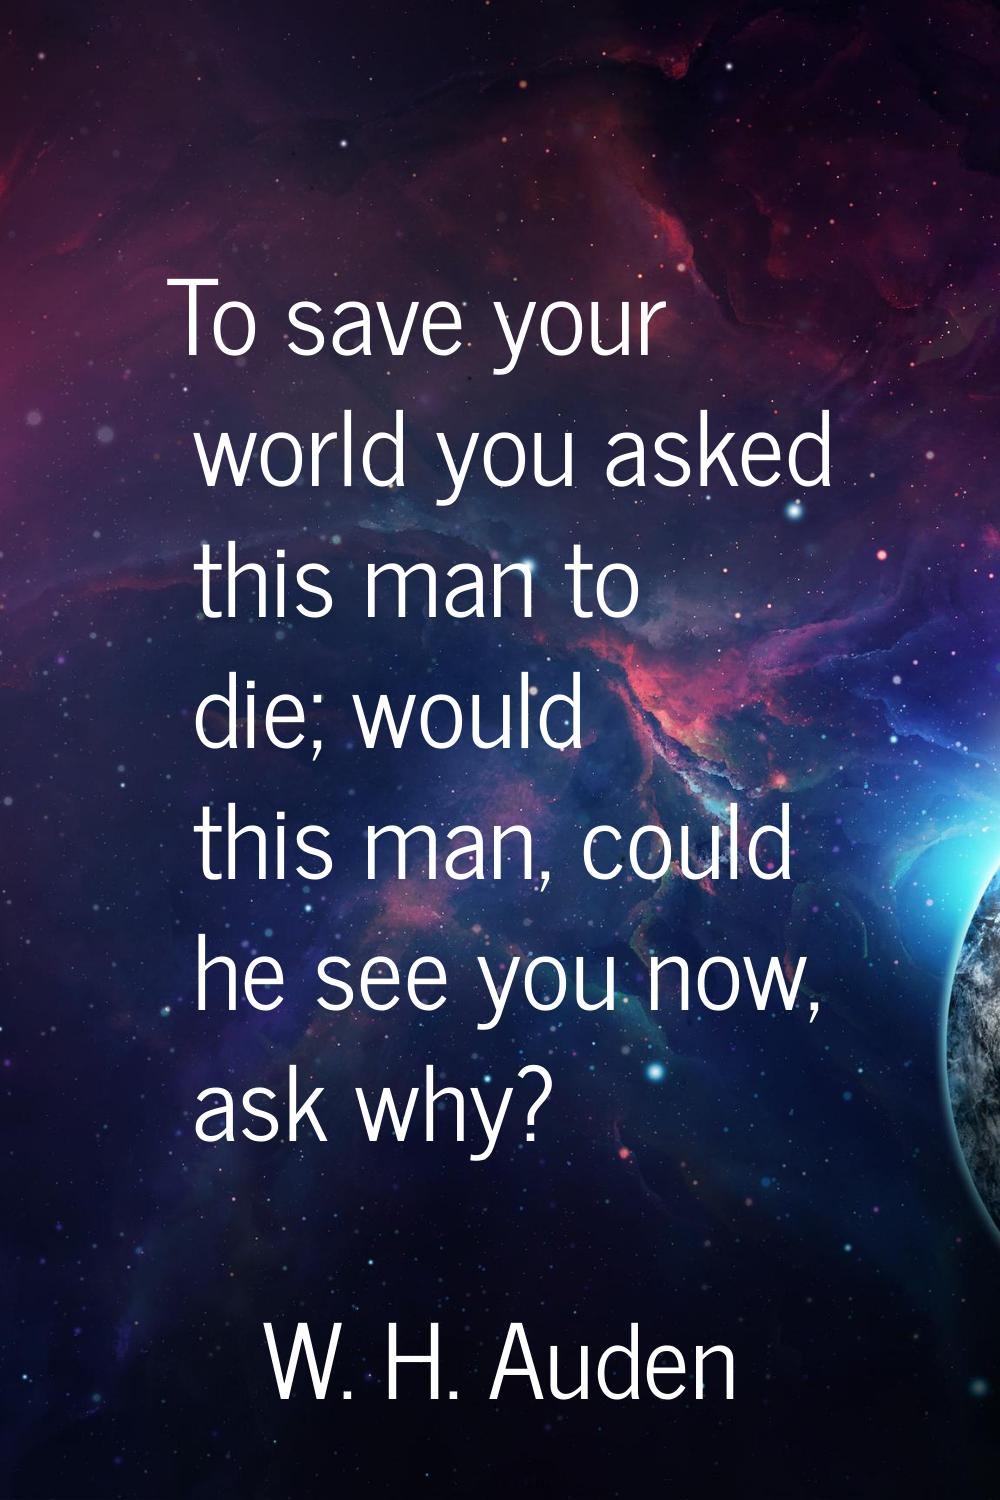 To save your world you asked this man to die; would this man, could he see you now, ask why?